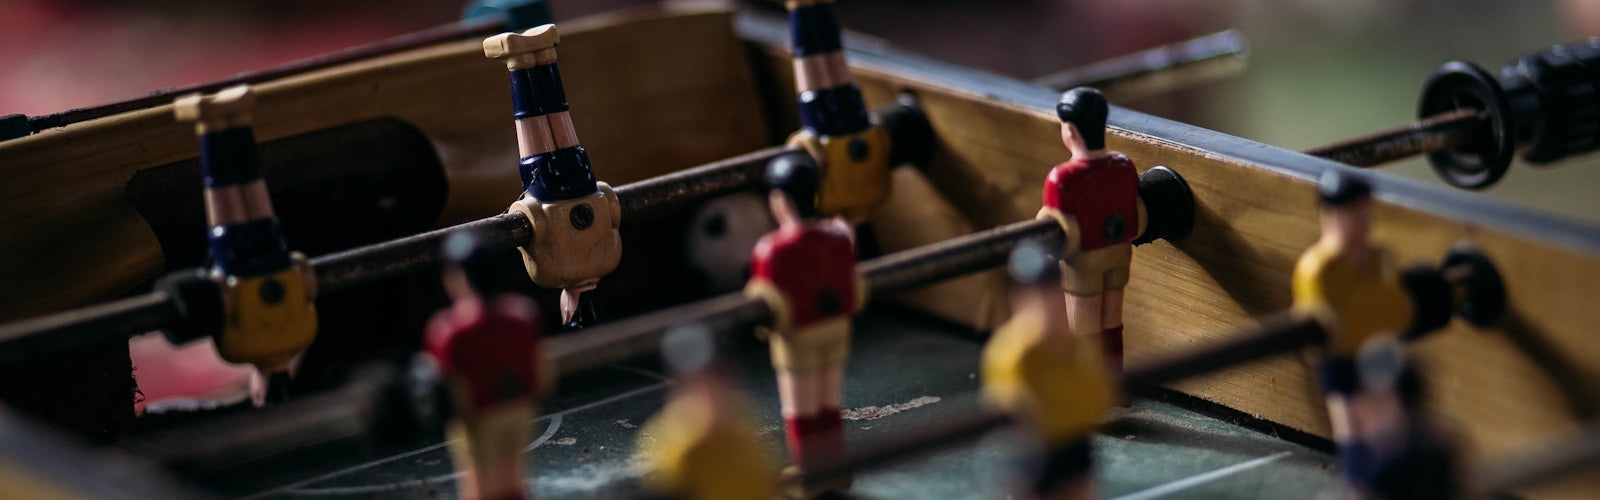 Close up photography of table football 2306897